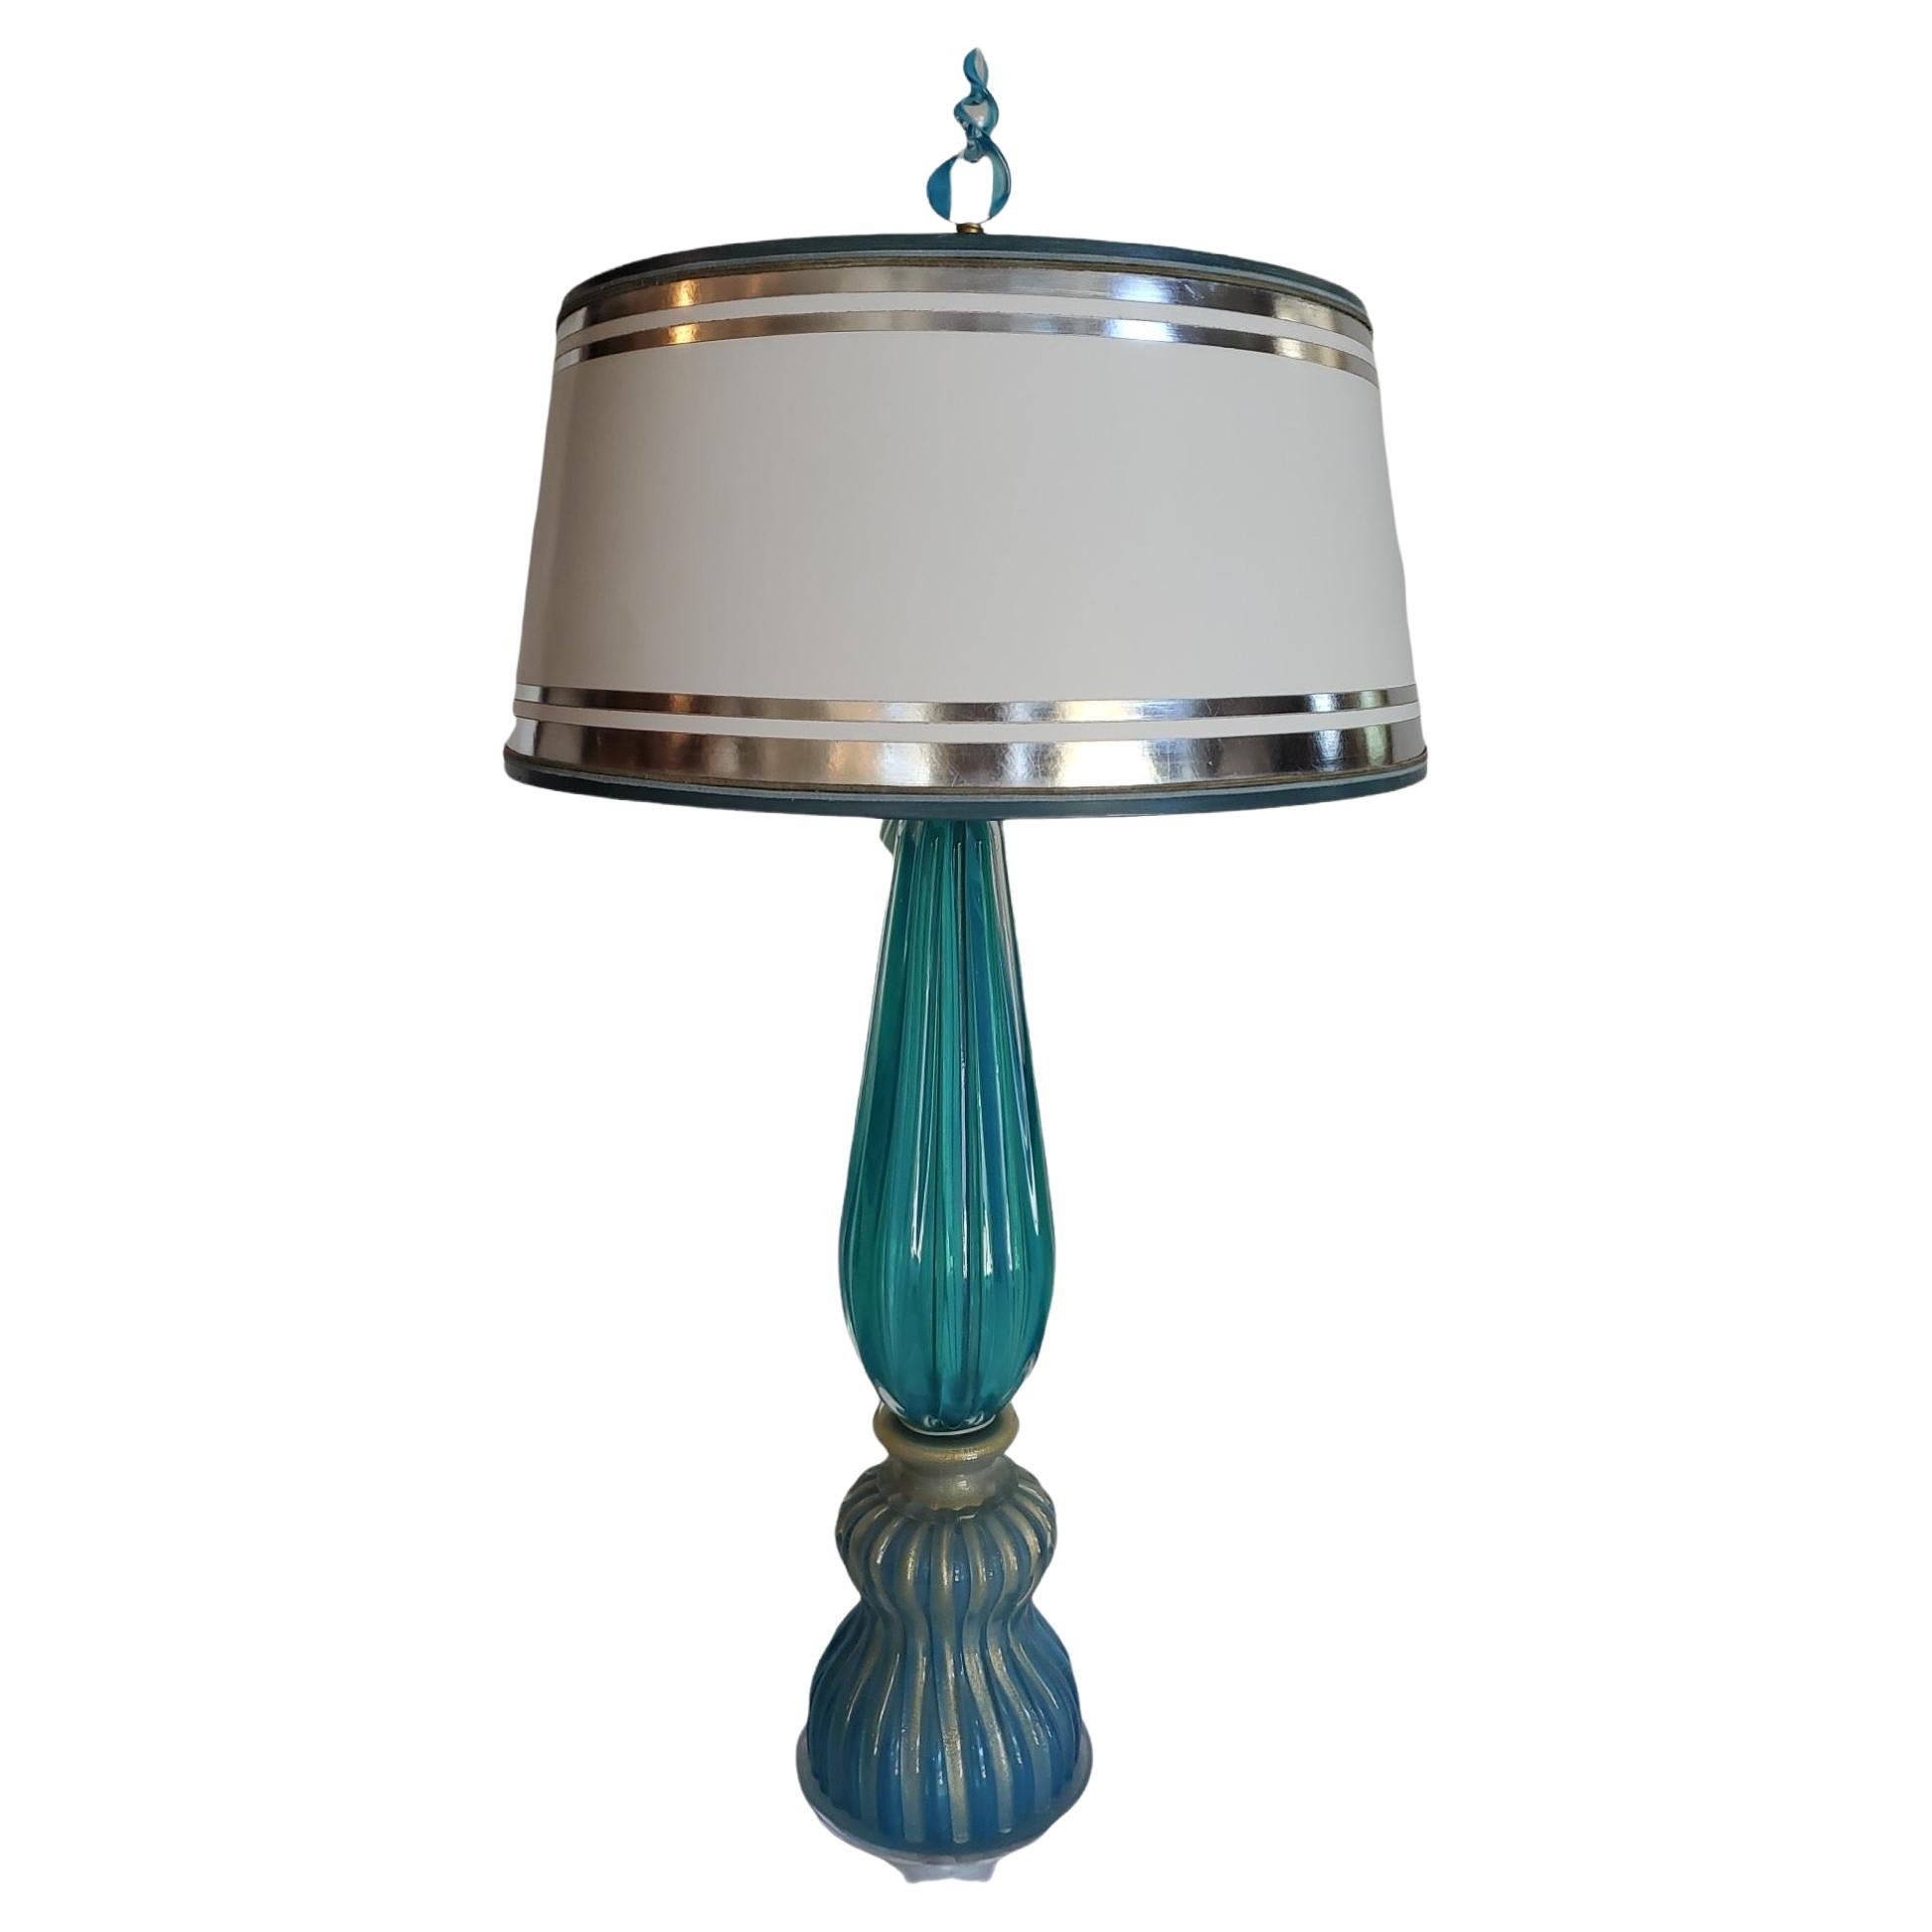 Vintage 1960s Turquoise Murano Lamp